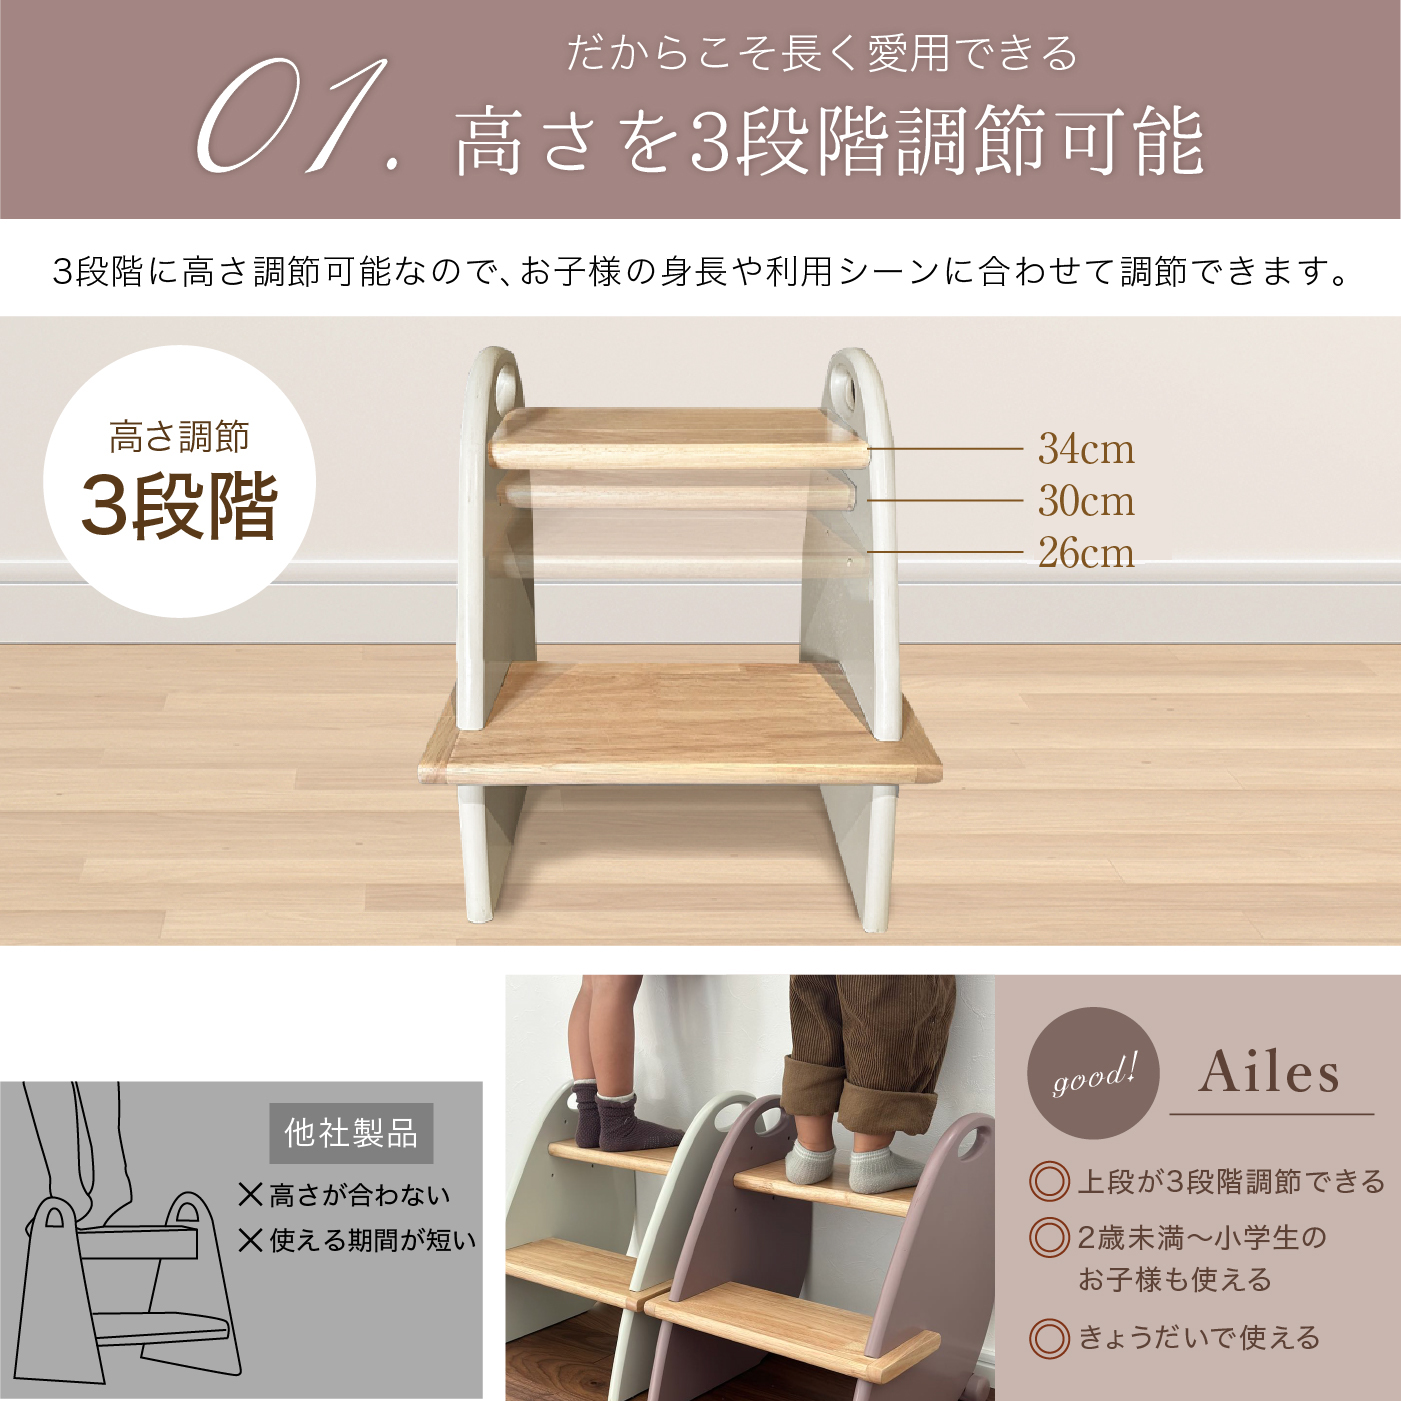  step‐ladder Kids step‐ladder step pcs for children step‐ladder step in terrier miscellaneous goods Northern Europe Ailes chair table shelf wooden purity 